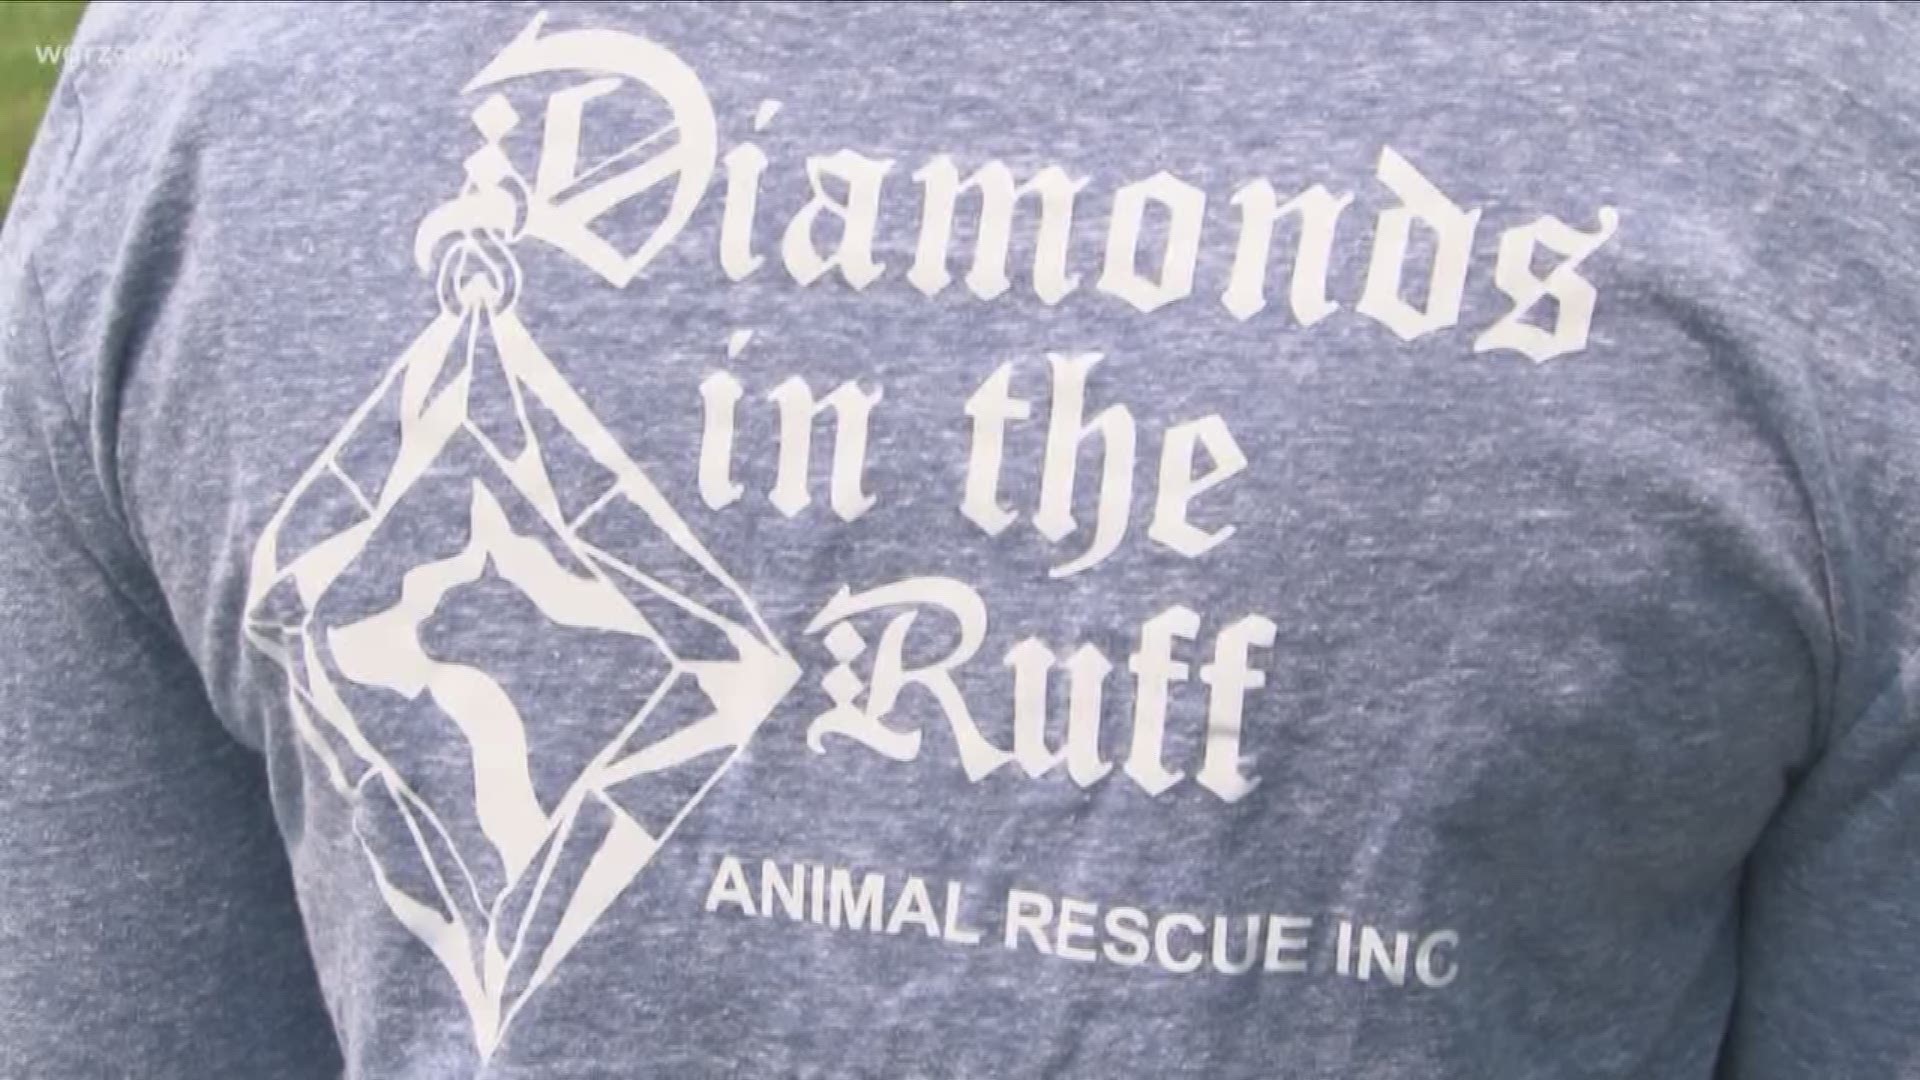 They rely on Good Samaritans in the community who are willing to take these animals in until they can find their forever homes.